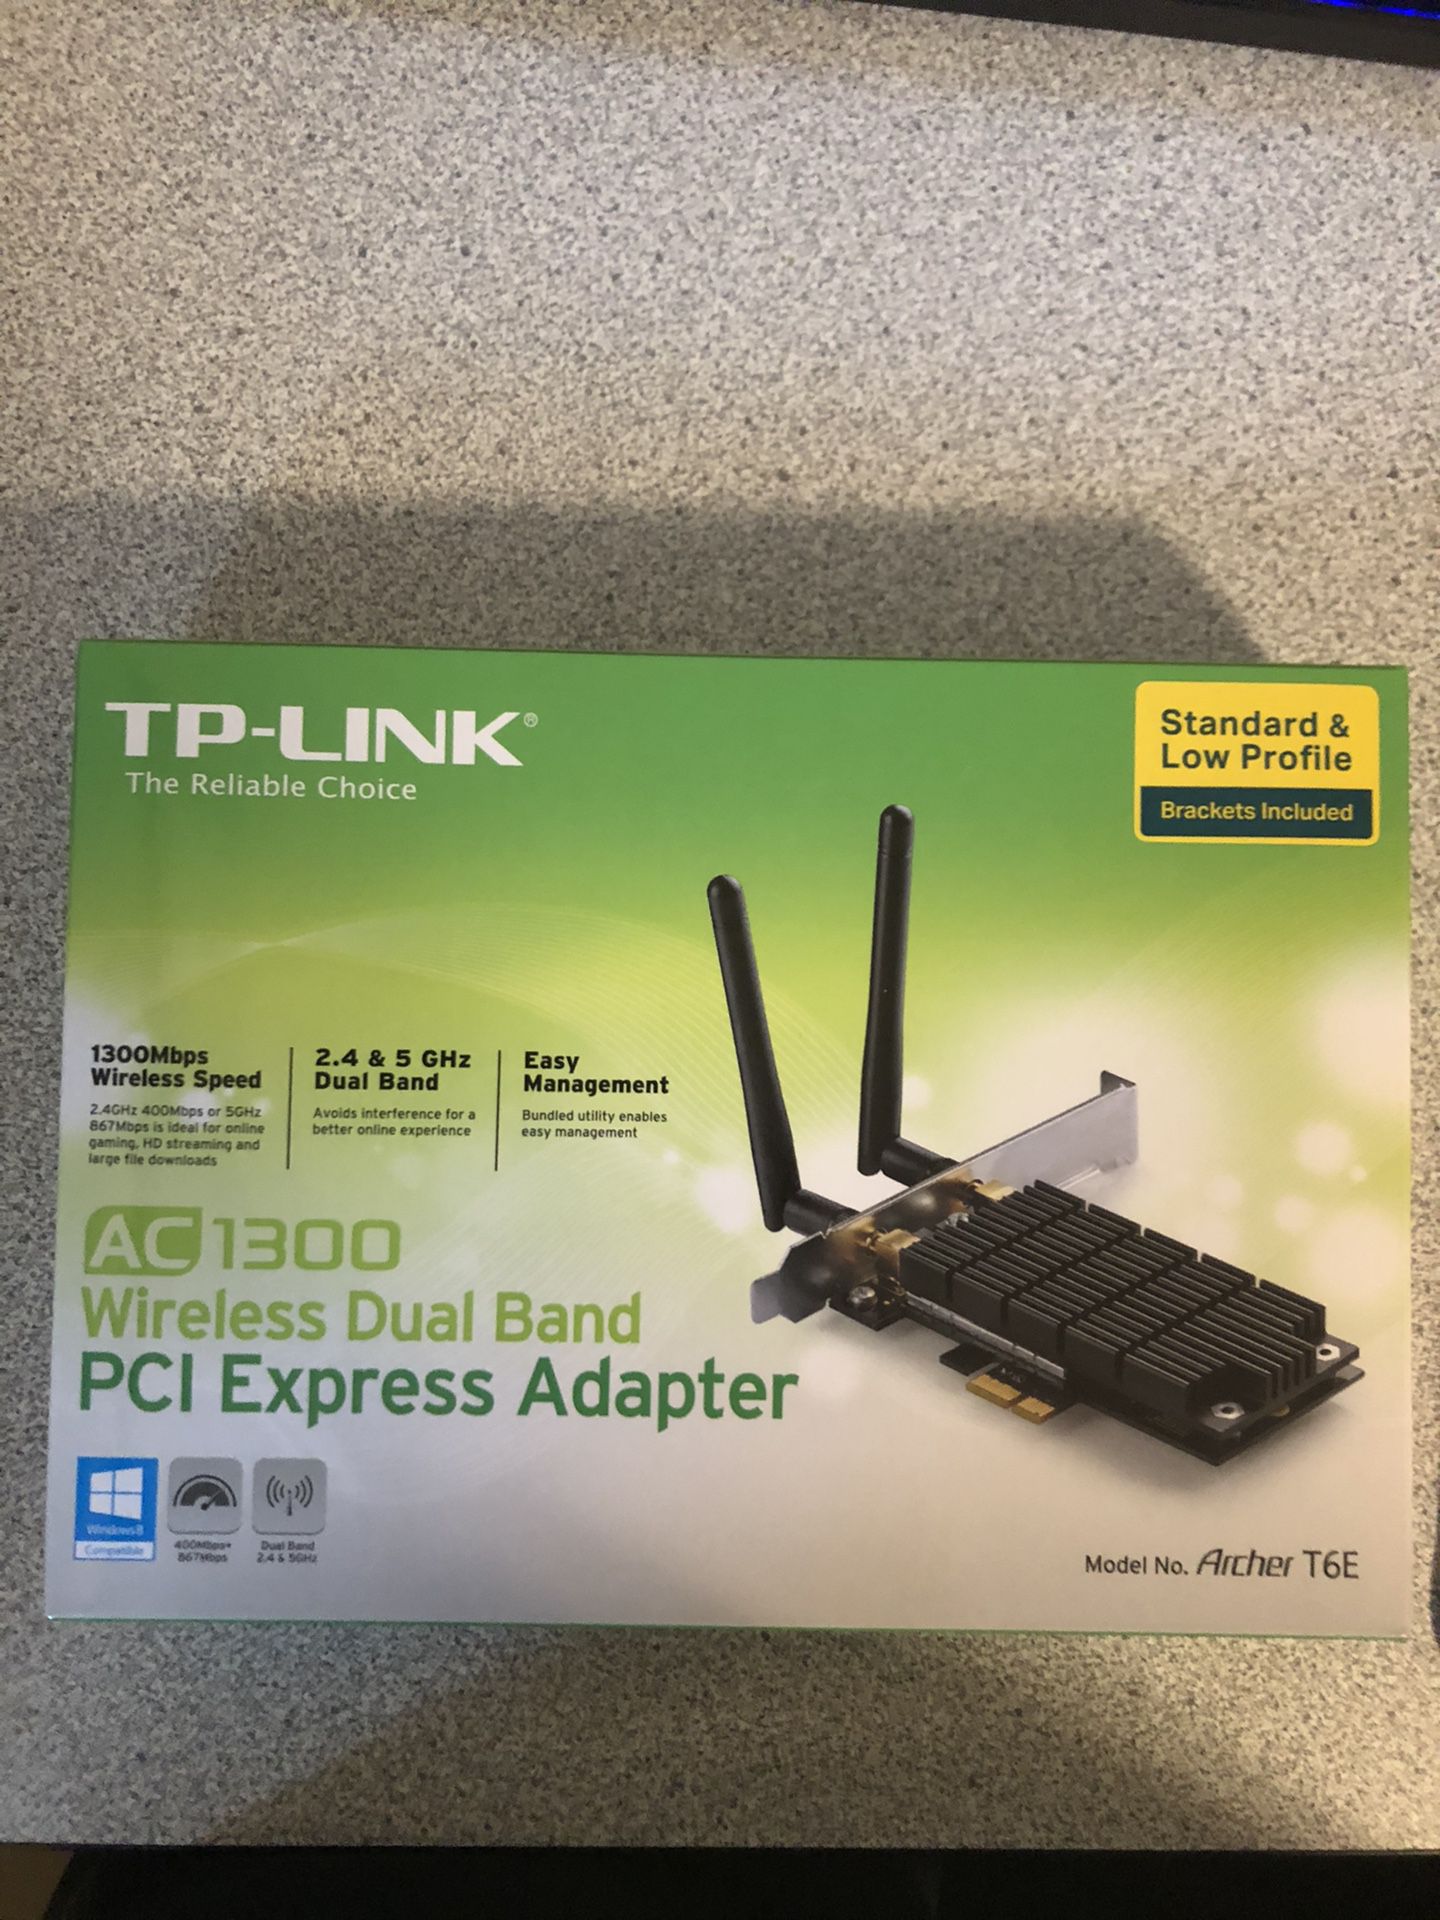 Wireless WiFi adapter for your PC